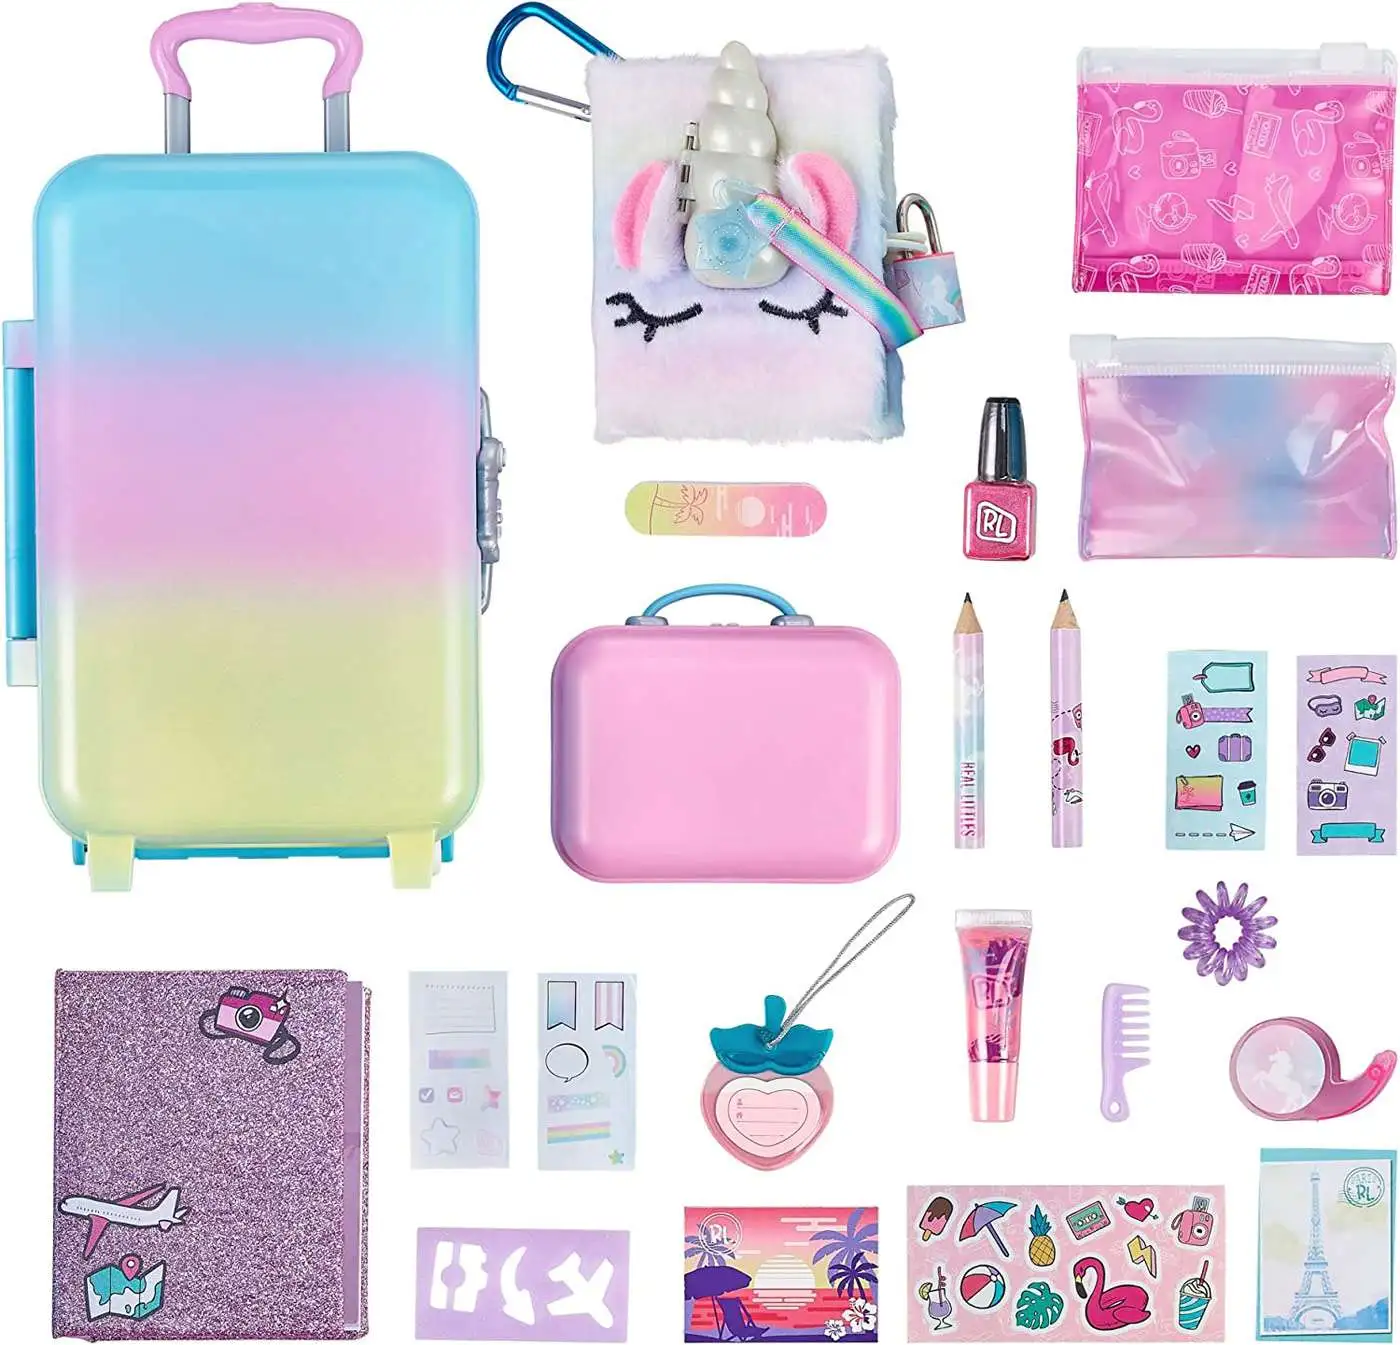 REAL LITTLES-S4 ROLLER CASE AND JOURNAL - Toys Club